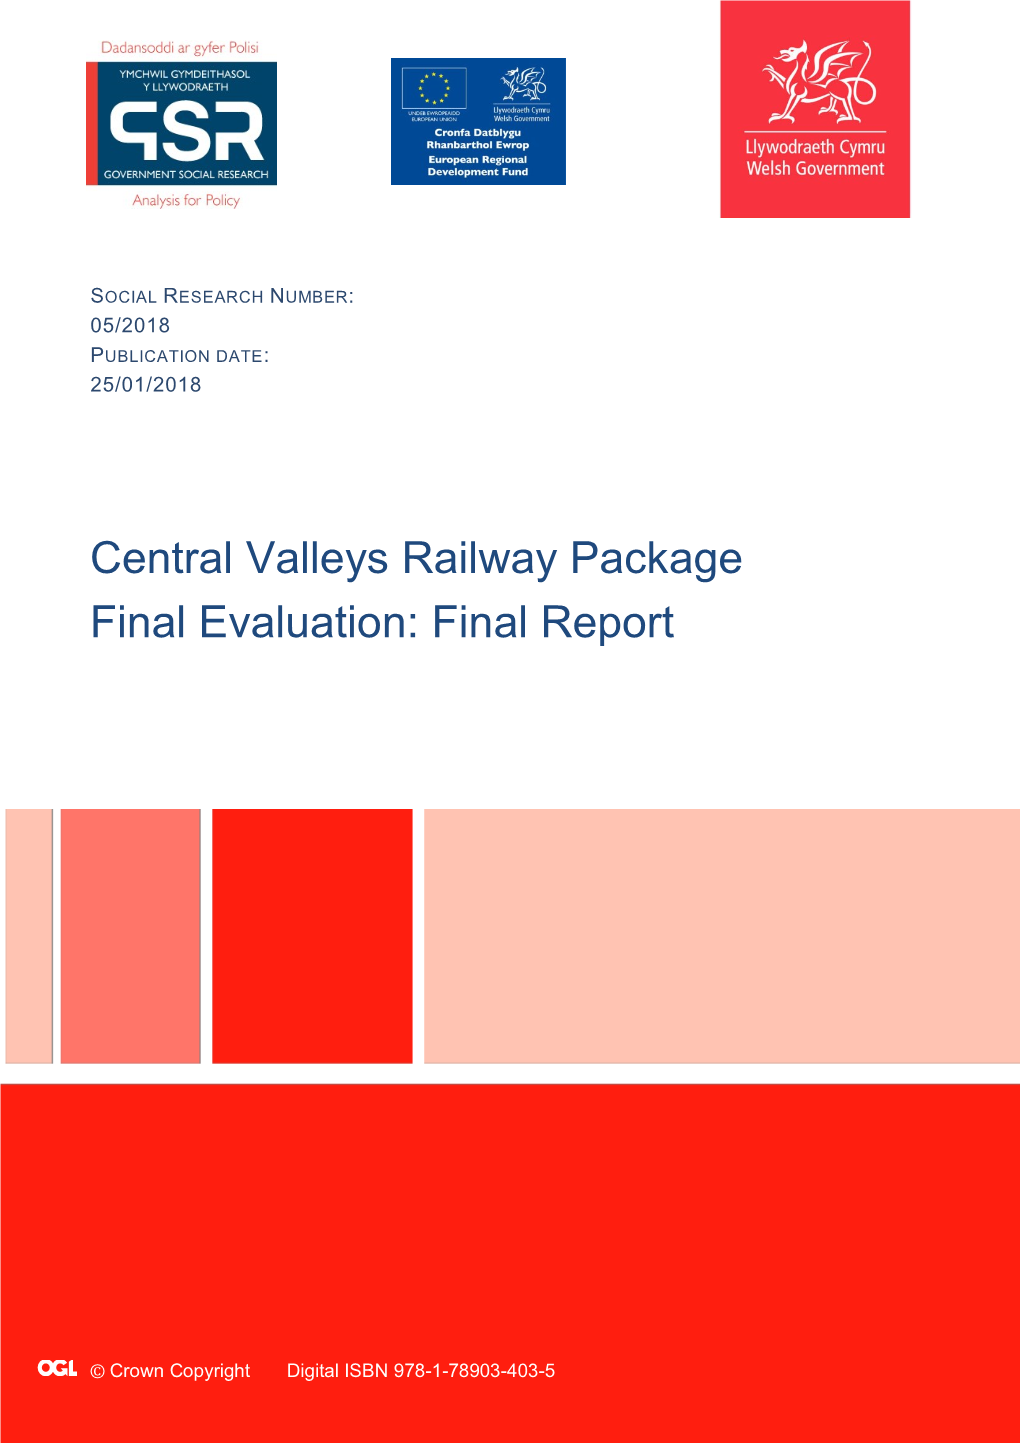 Central Valleys Railway Package Final Evaluation: Final Report